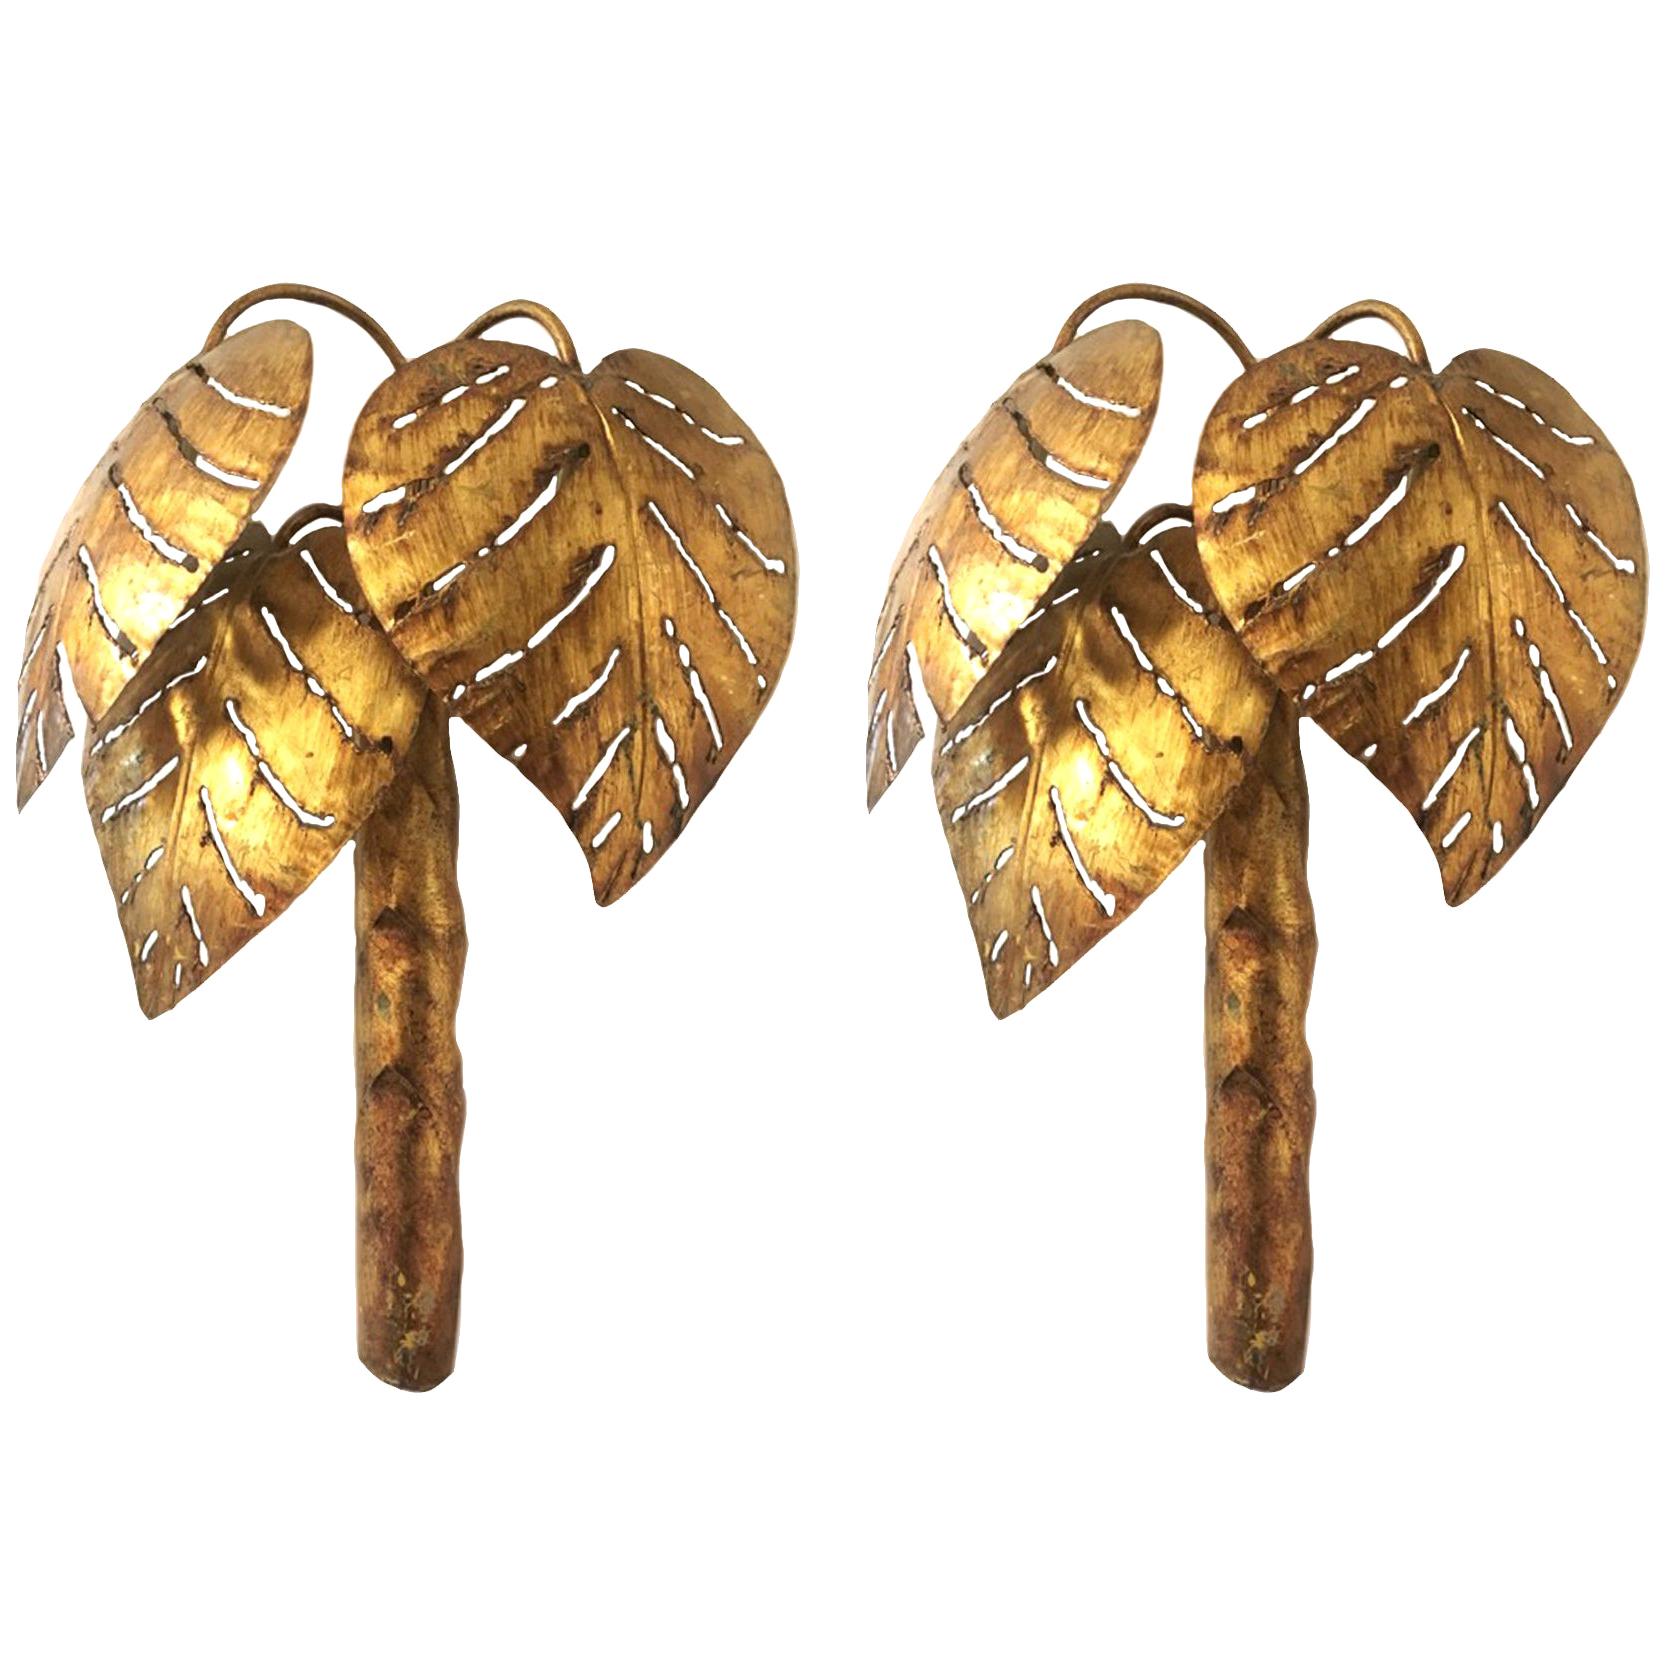 Mid-20th Century Set of Large Gilt Metal Palm Leaf Sconces, Sold in Pairs For Sale